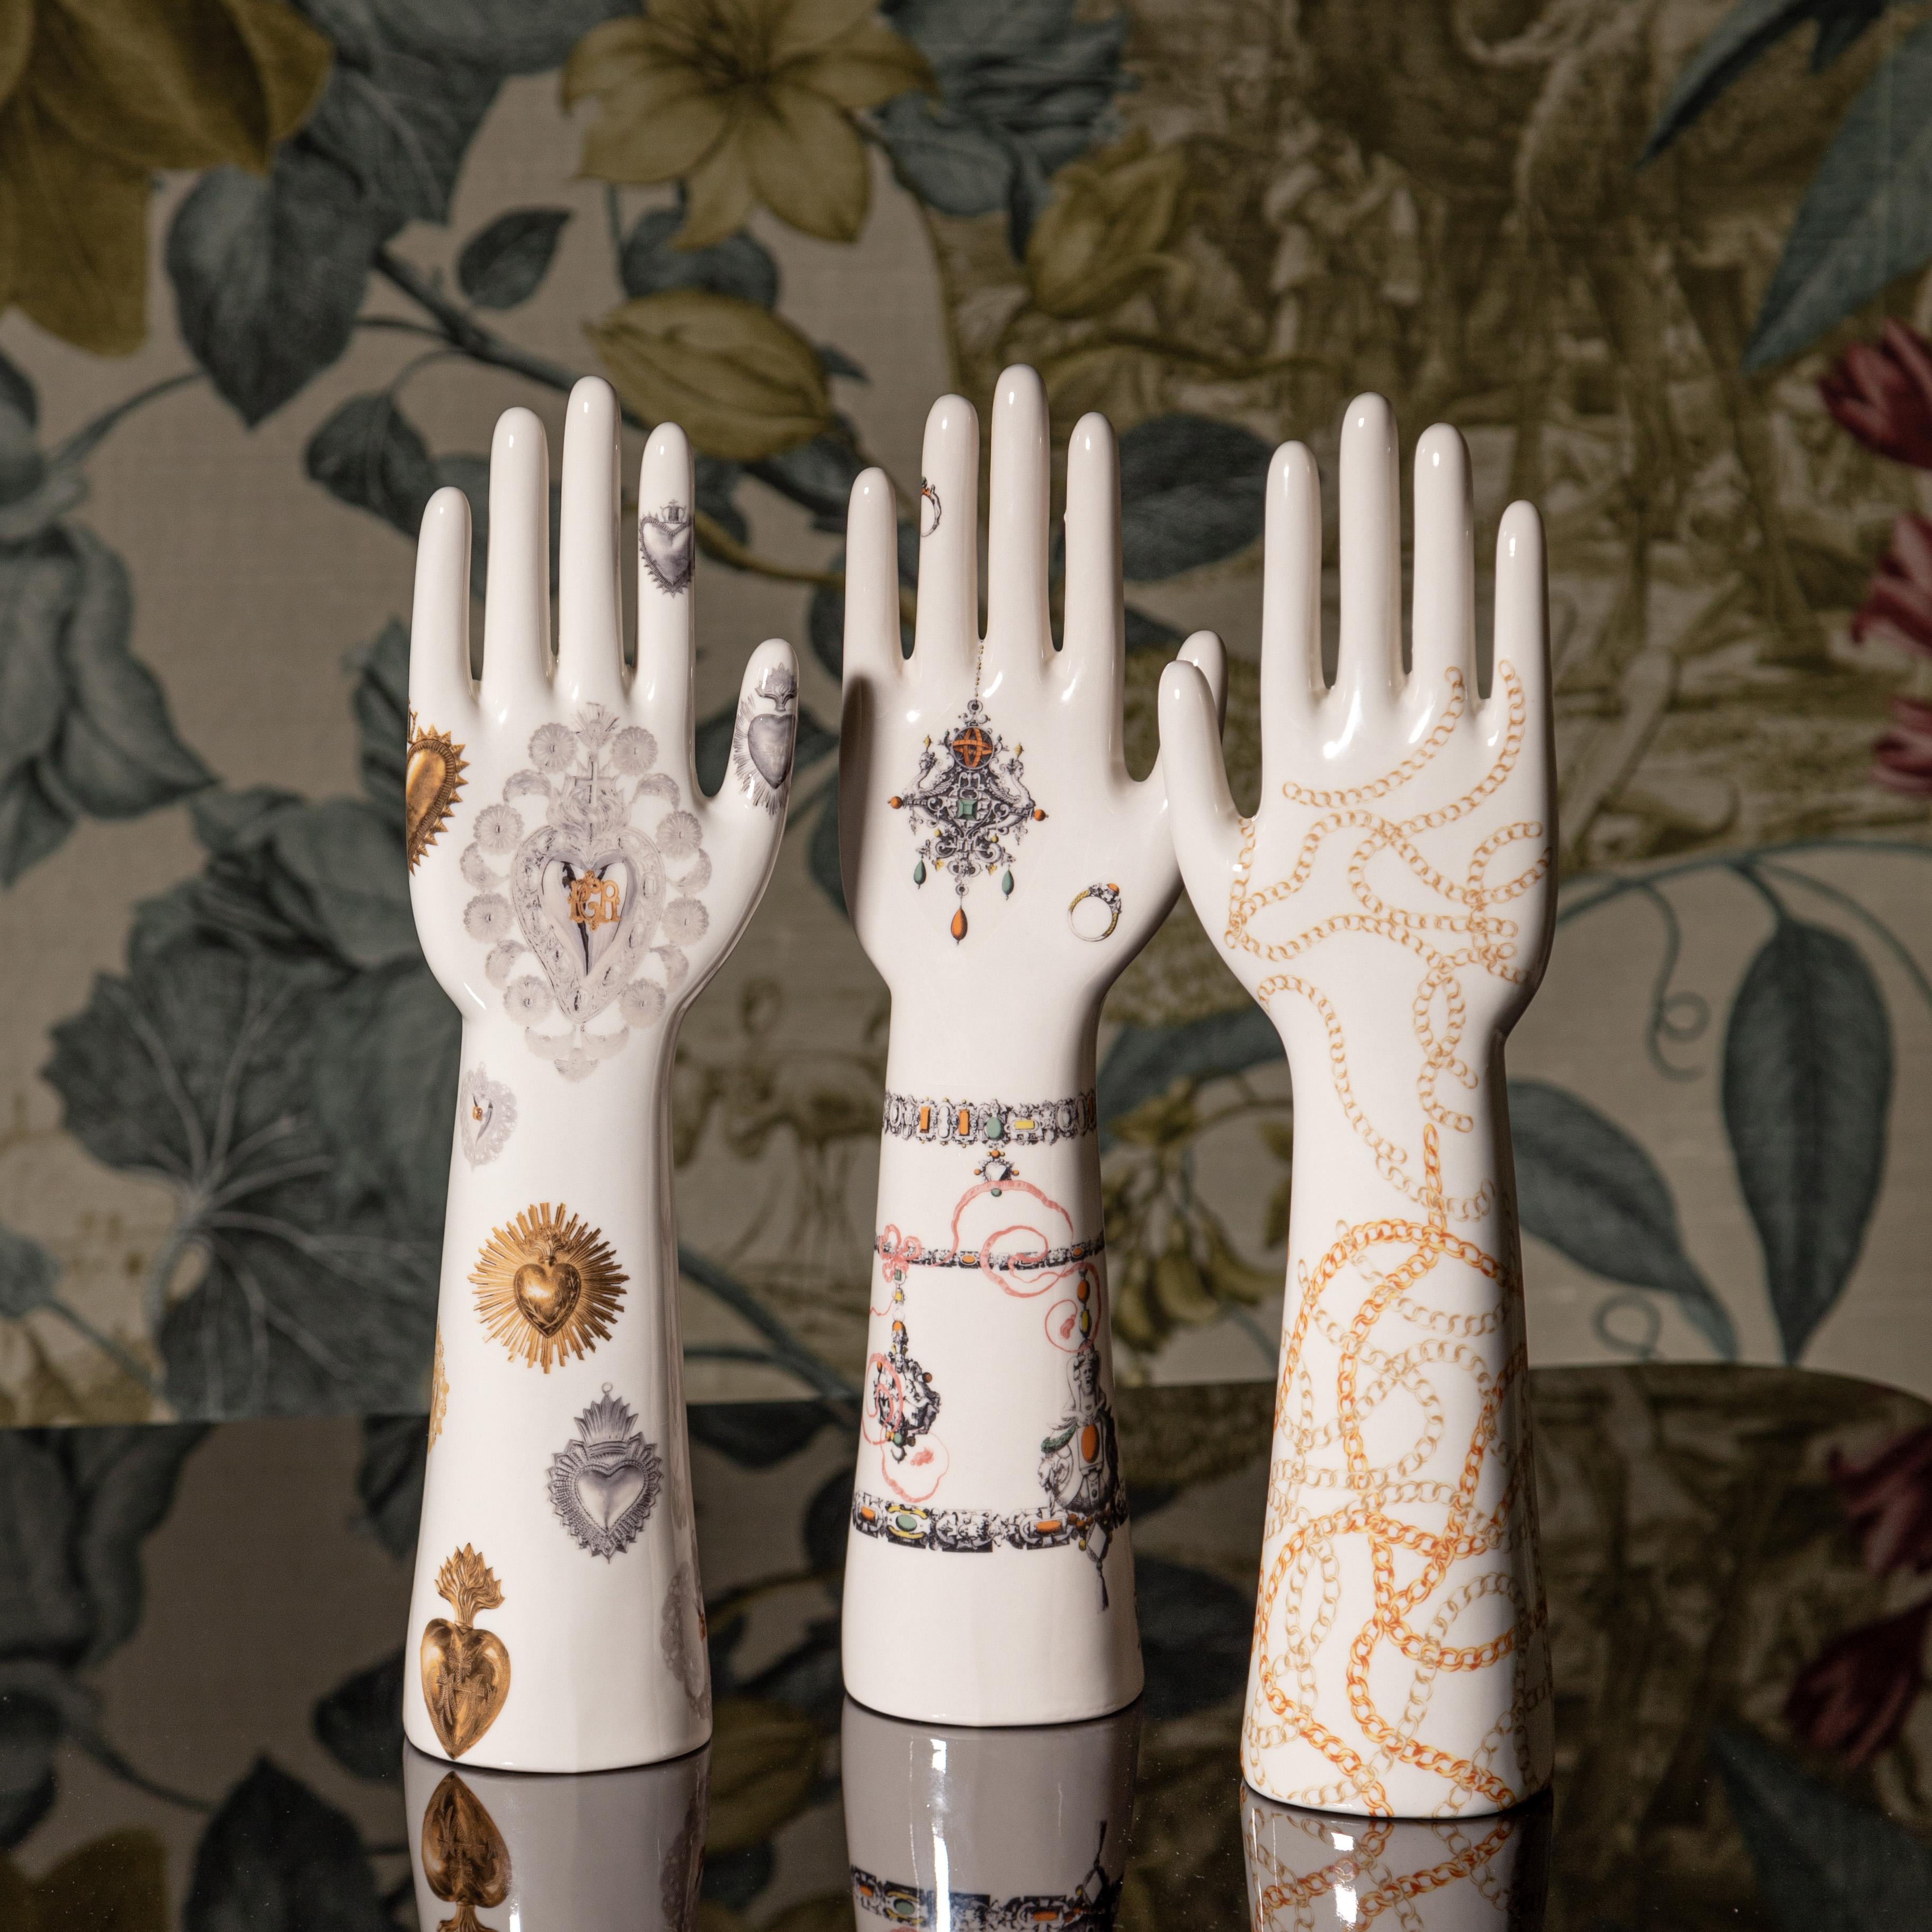 Anatomica, Porcelain Hand with chains Decoration by Vito Nesta For Sale 1